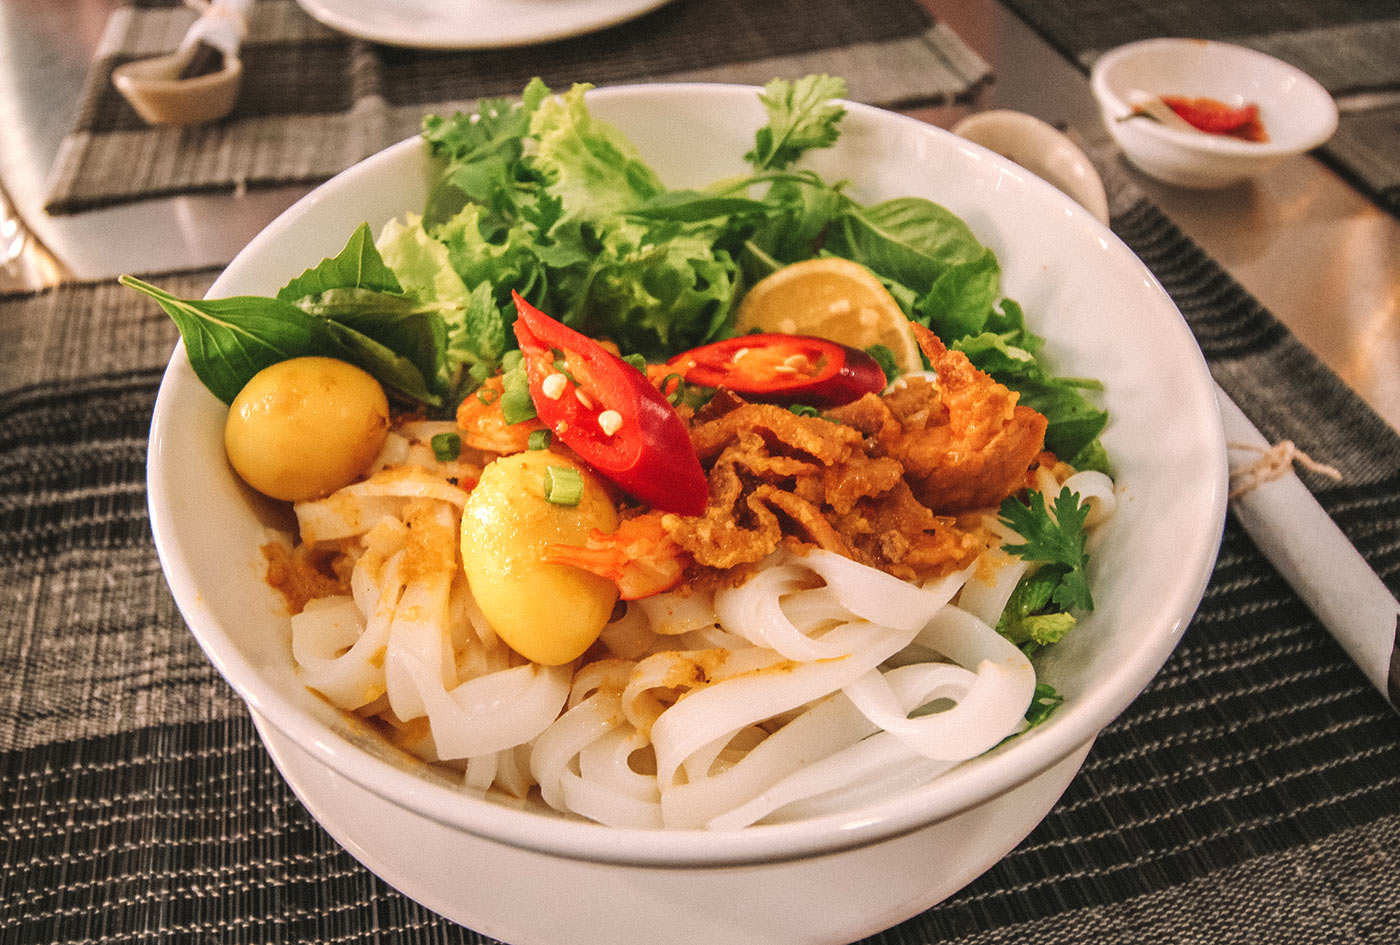 Hoi An food guide | The best street food to try in Hoi An, Vietnam blog post | mi quang